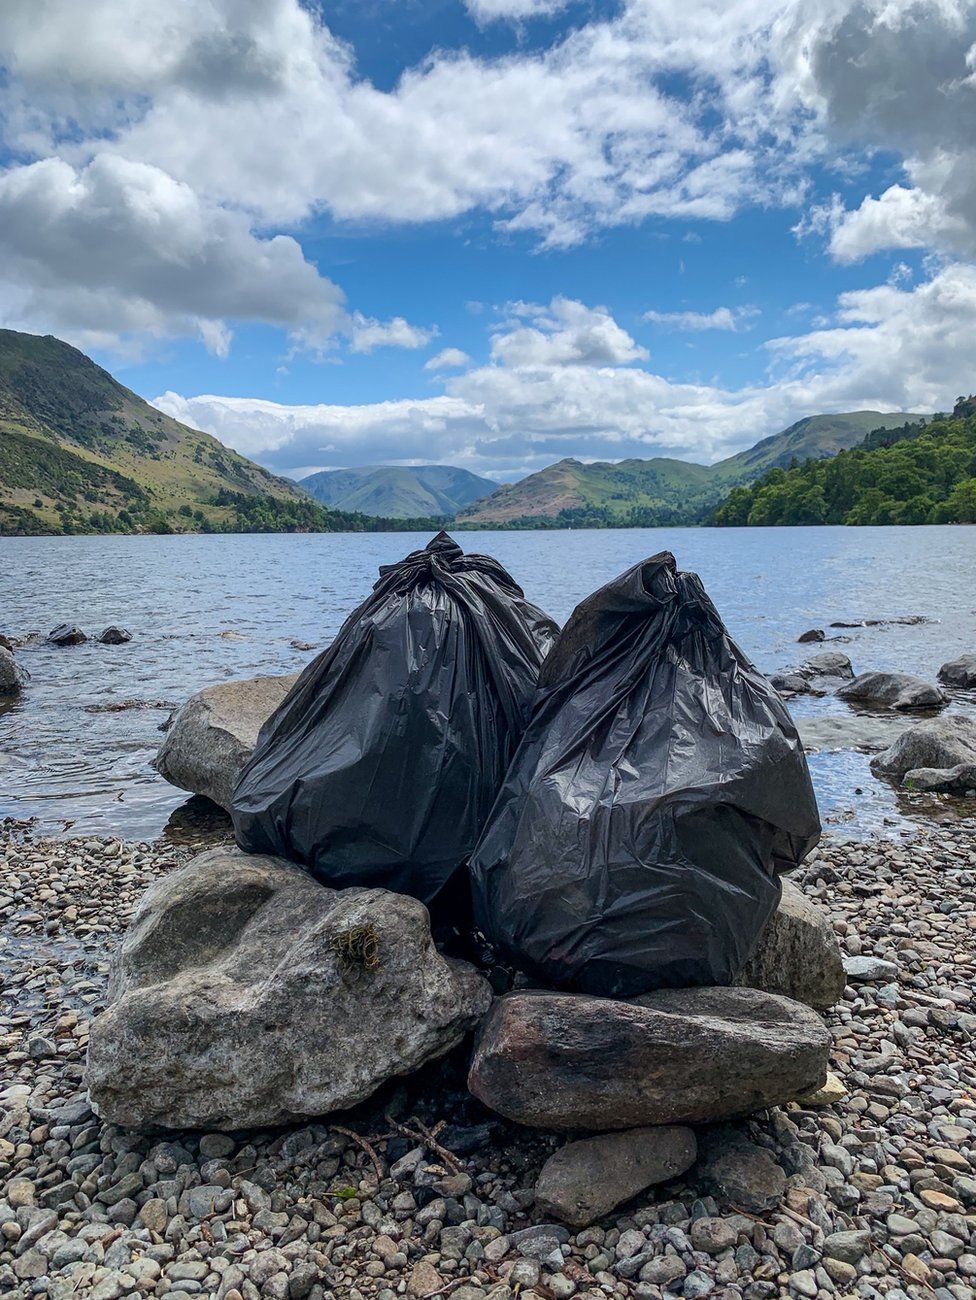 Two bags of rubbish collected at the side of a lake